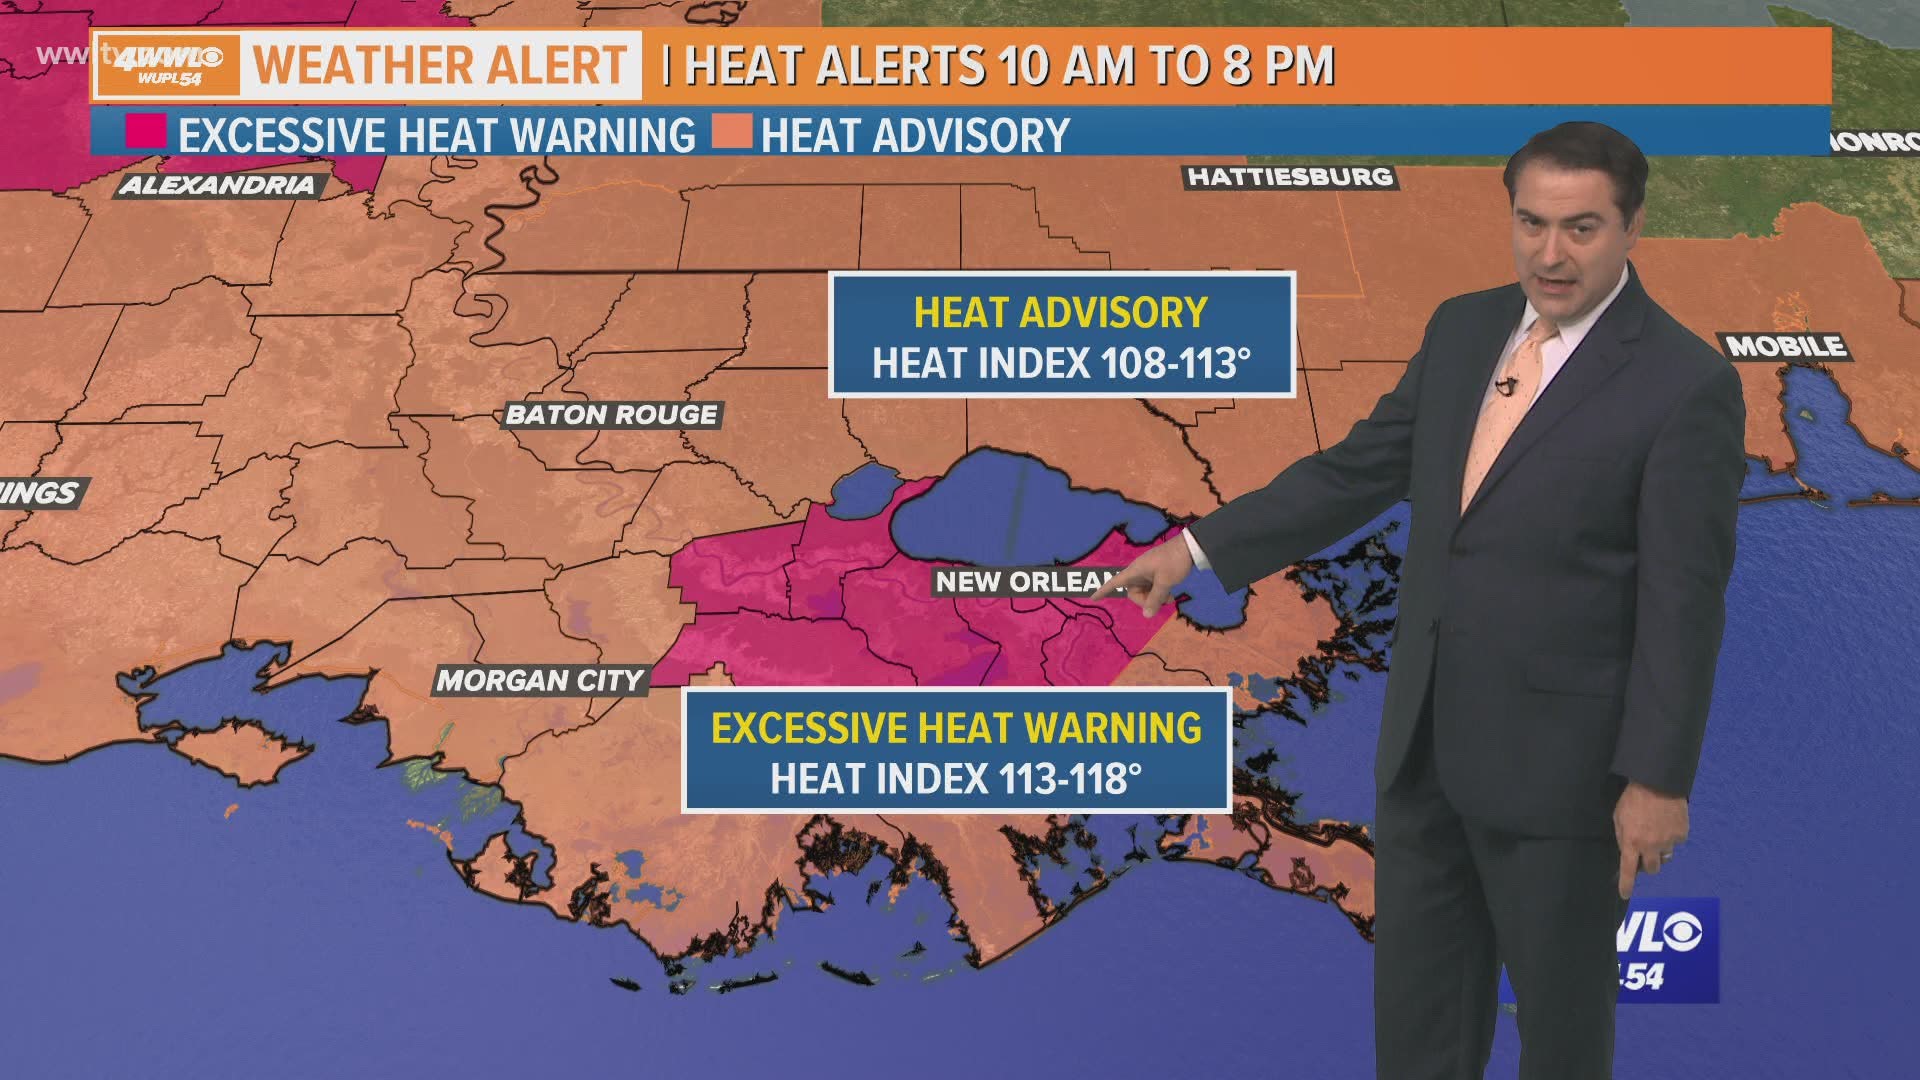 Excessive heat warning for parts of southeast Louisiana